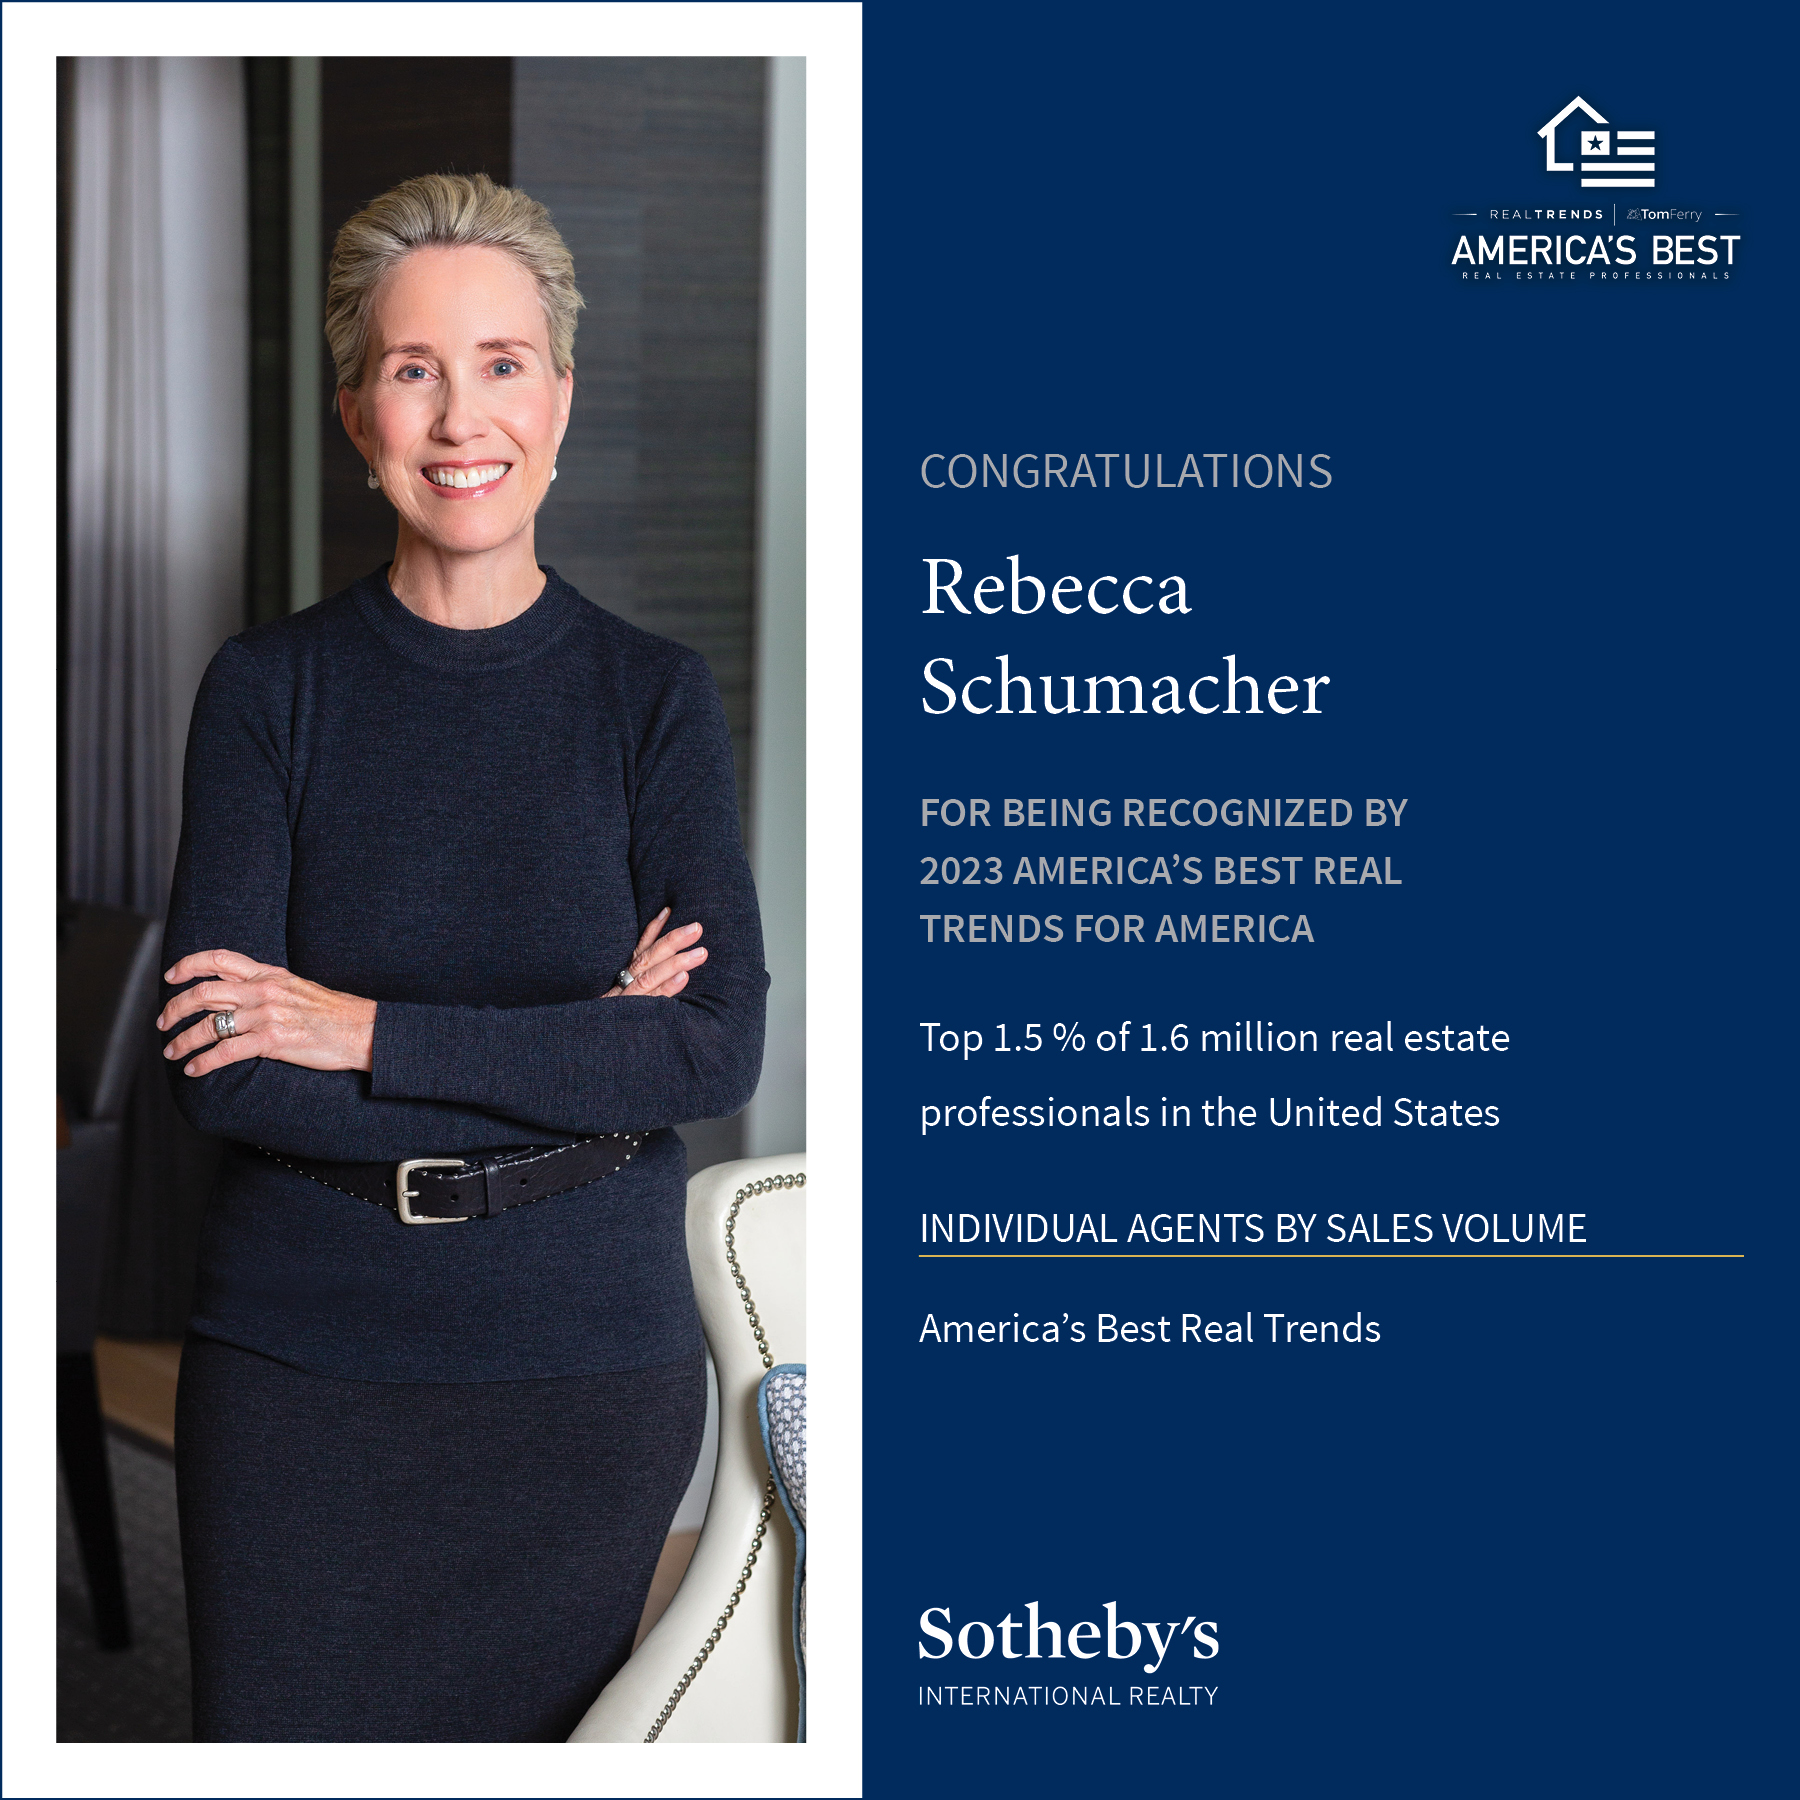 Rebecca Schumacher Named to Real Trends "America’s Best" List | 2023